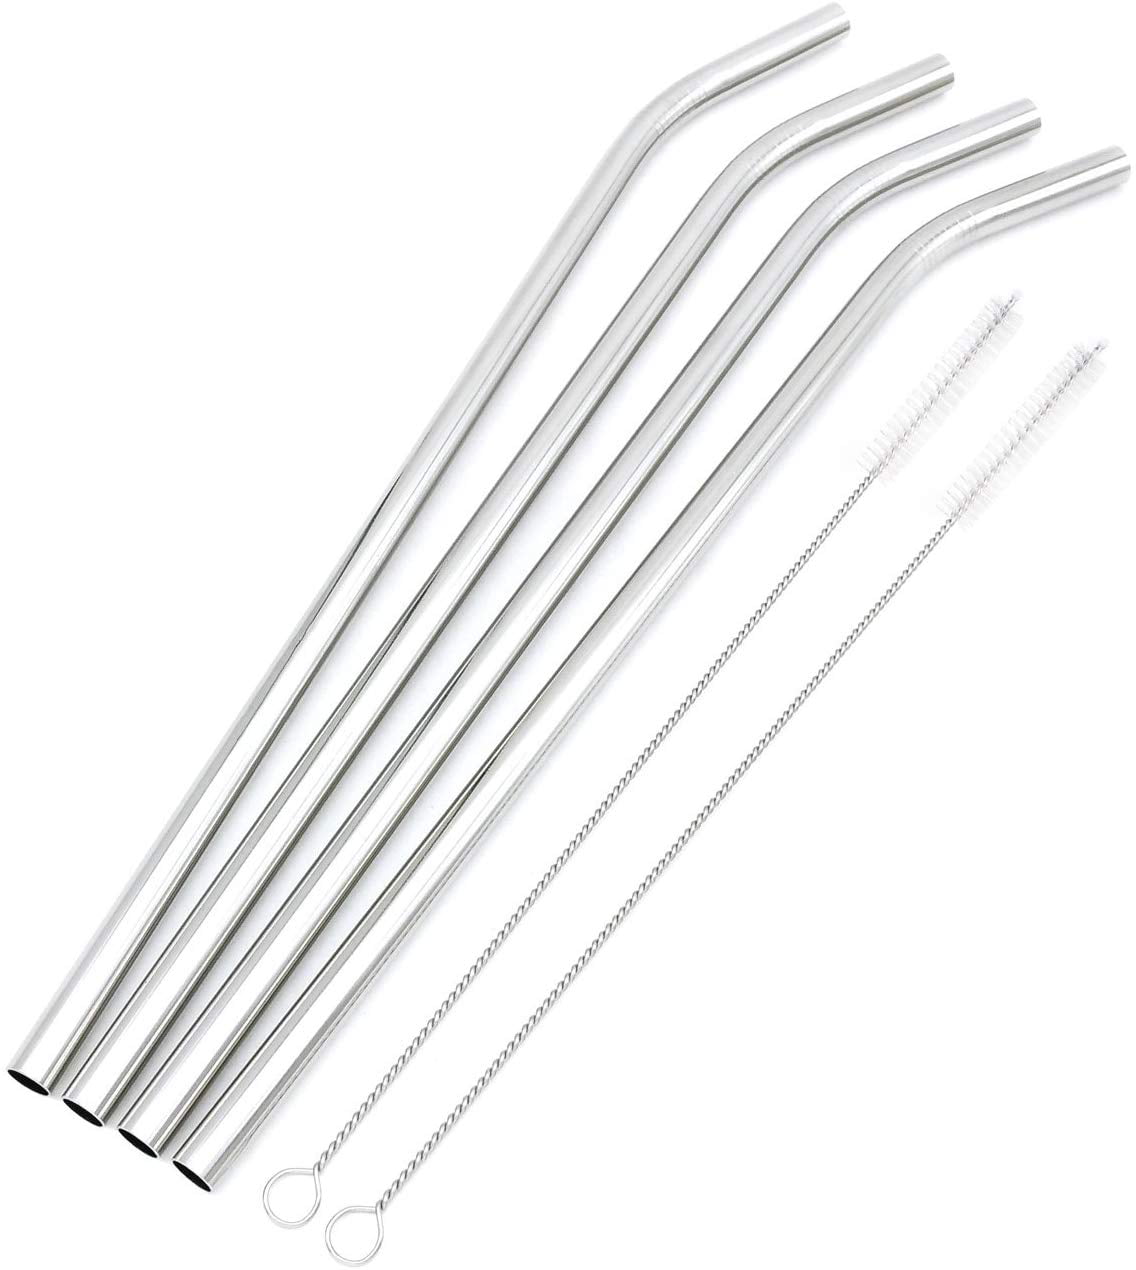 4pc Stainless Steel Metal Silver Reusable Straw Set Extra Wide & Brush & Pouch